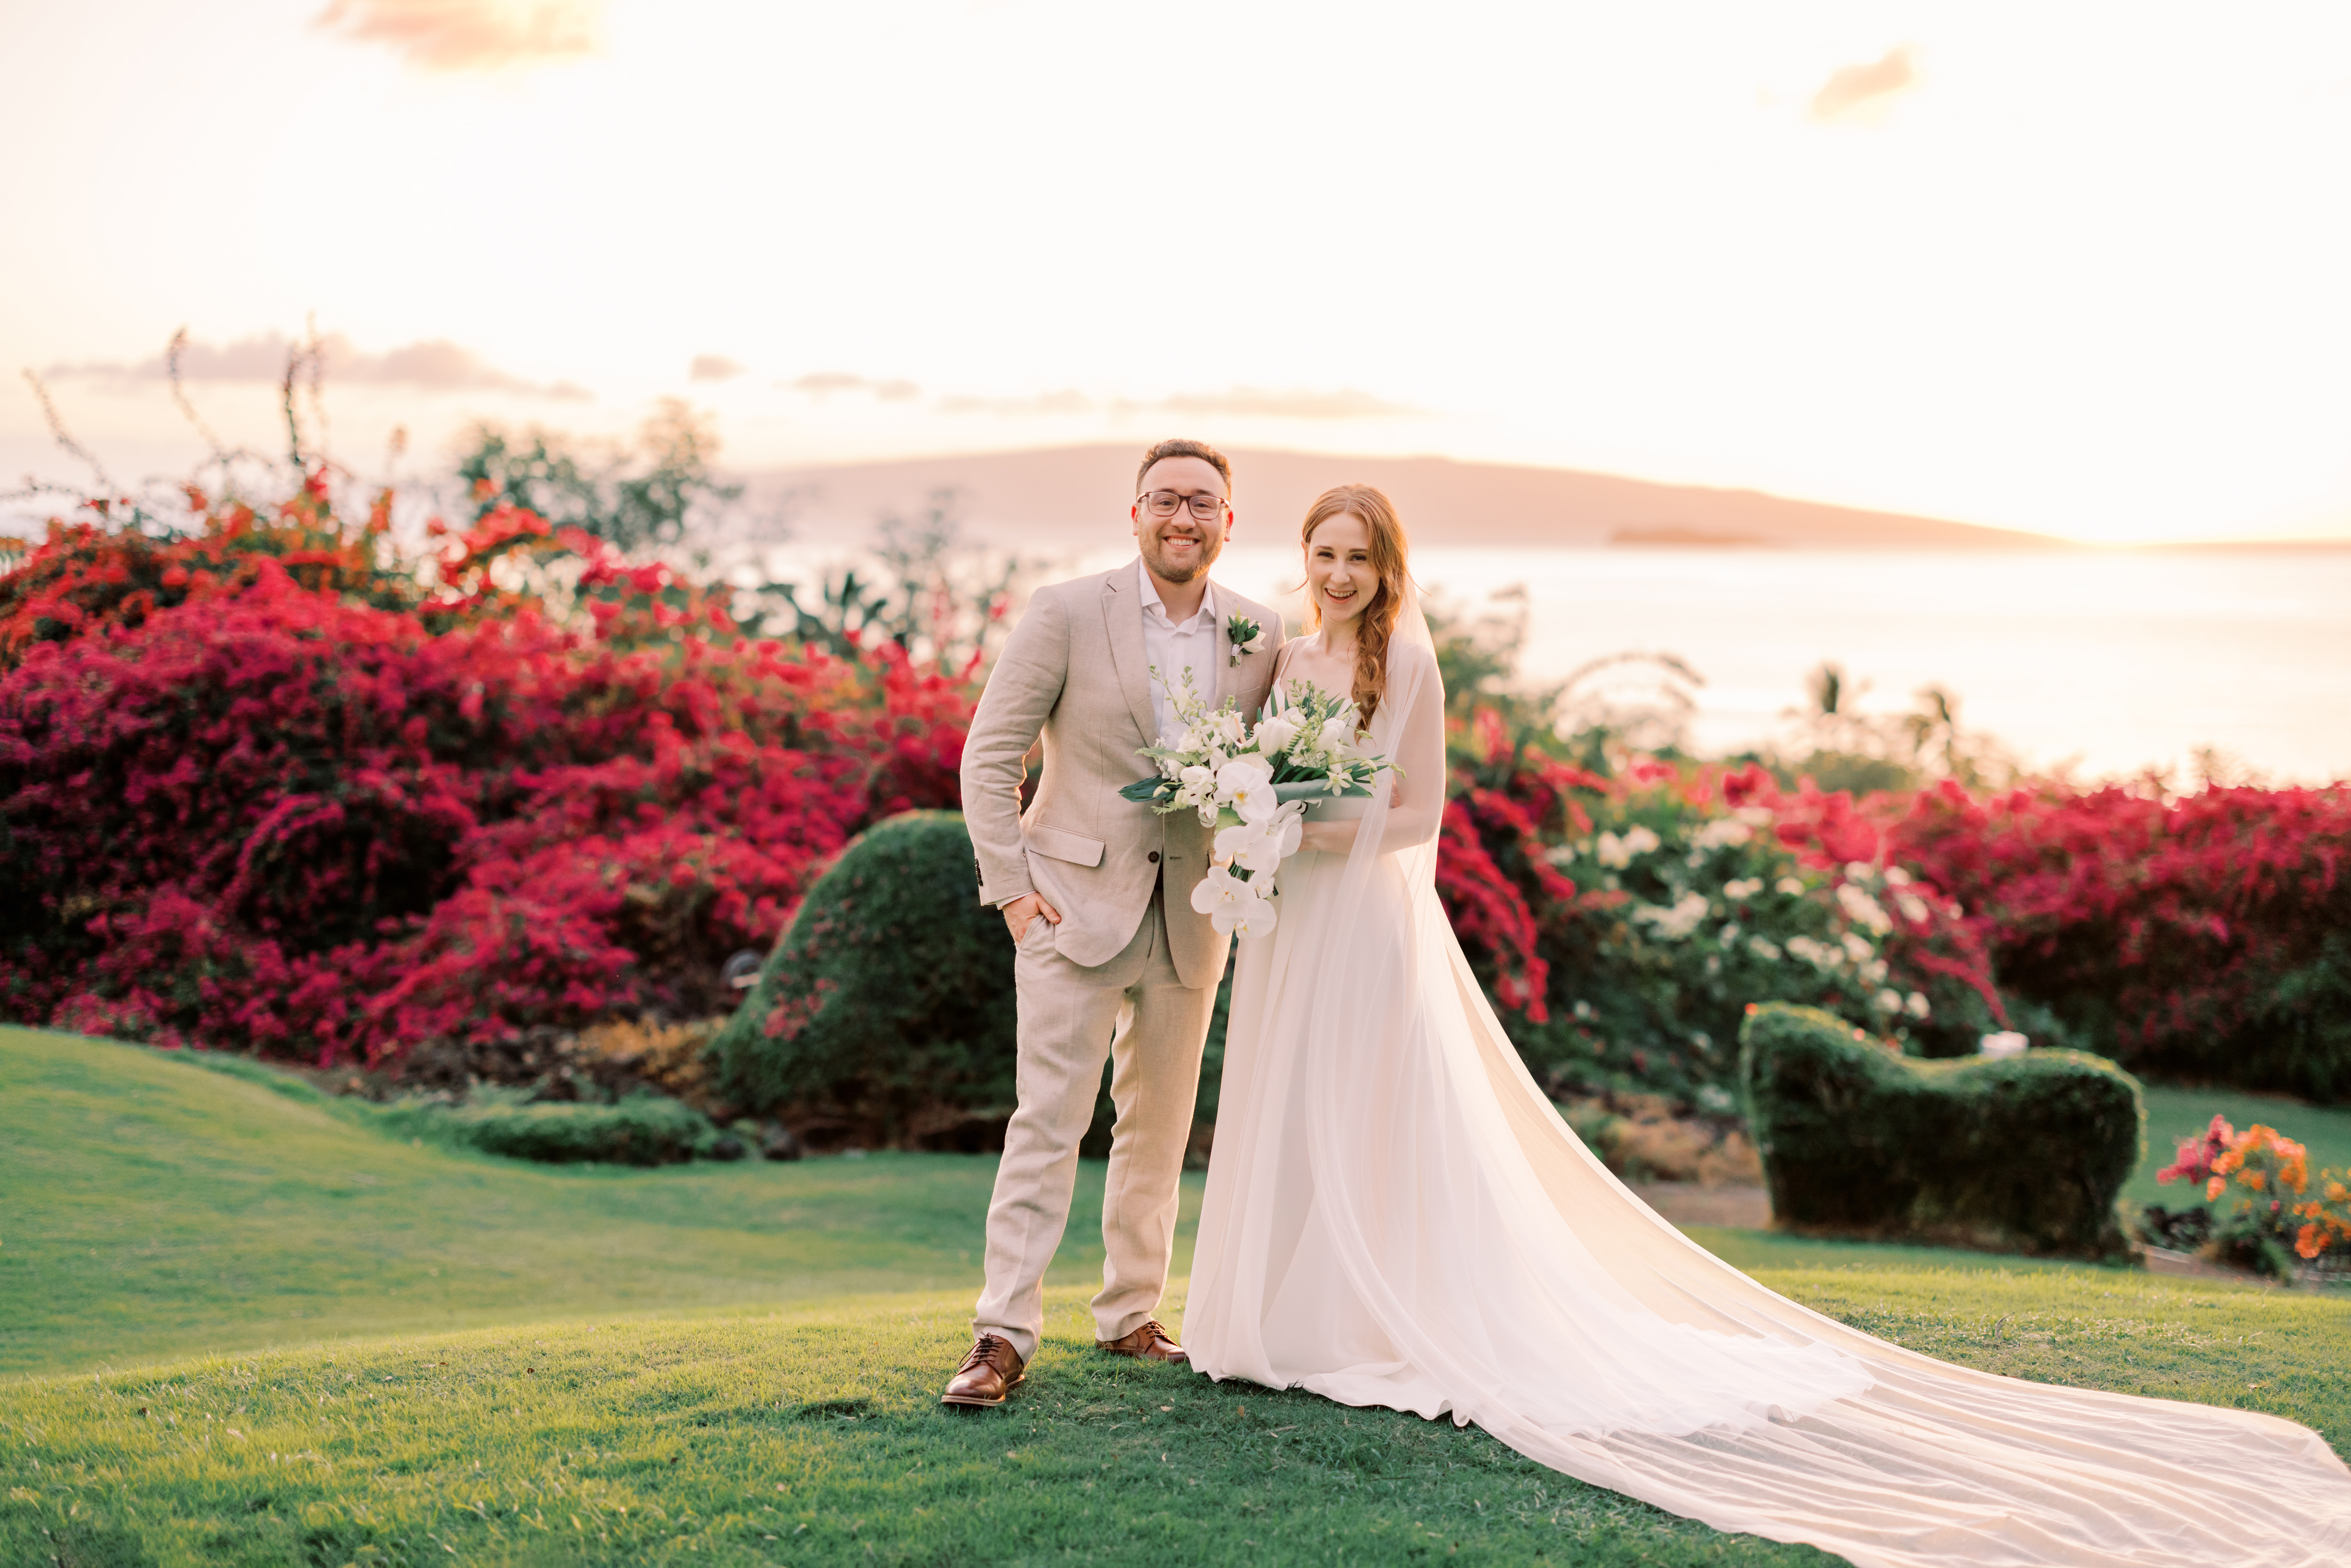 Groom standing beside bride wearing a white wedding dress holding flowers during sunset